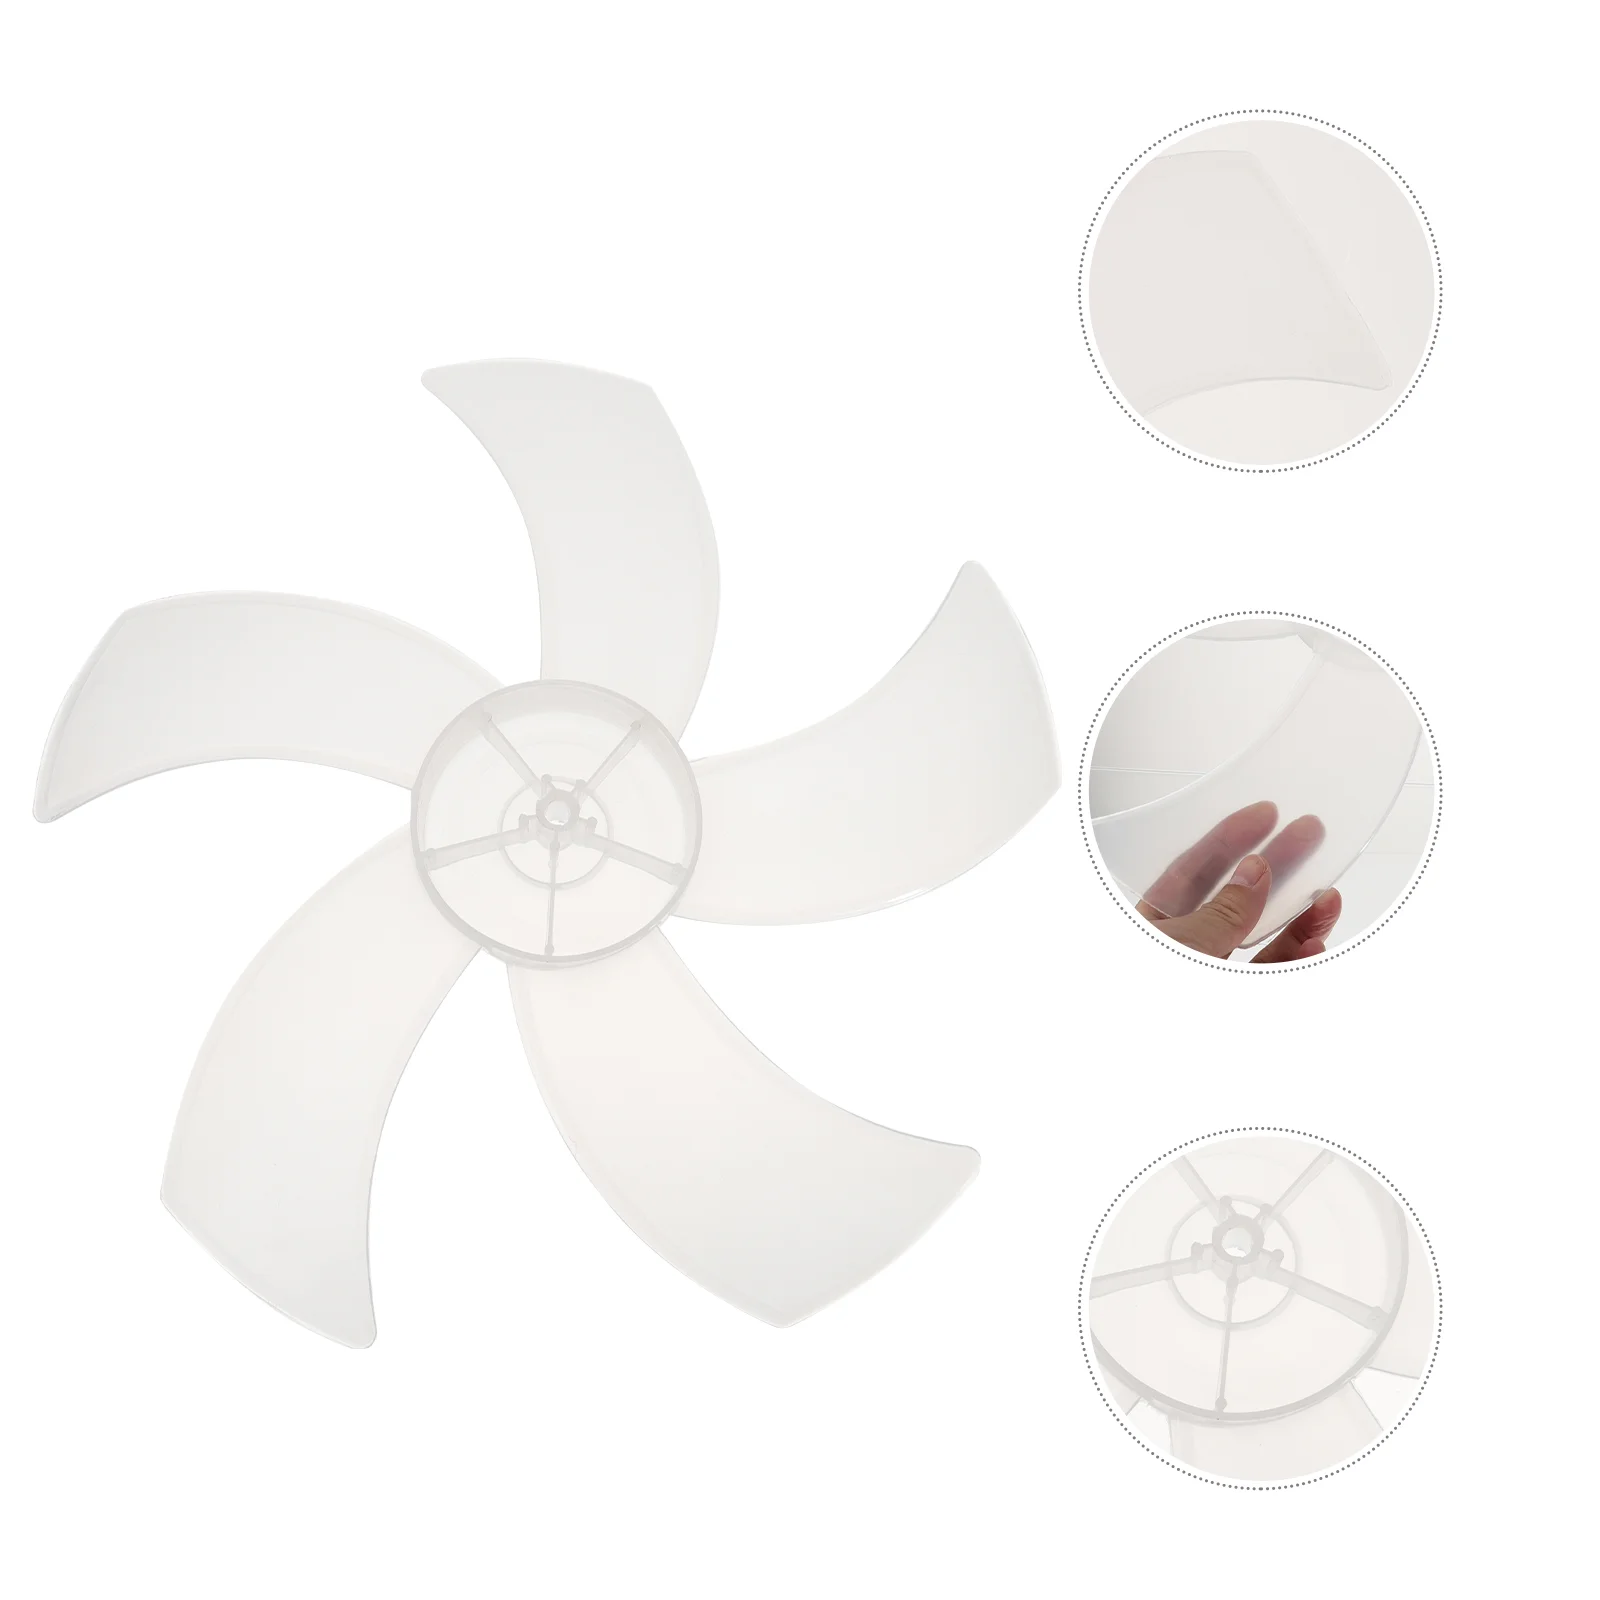 

2 Pcs Wind Fan Supply Blades Parts Substitution Table Creative Replacement Accessory Plastic Practical Home